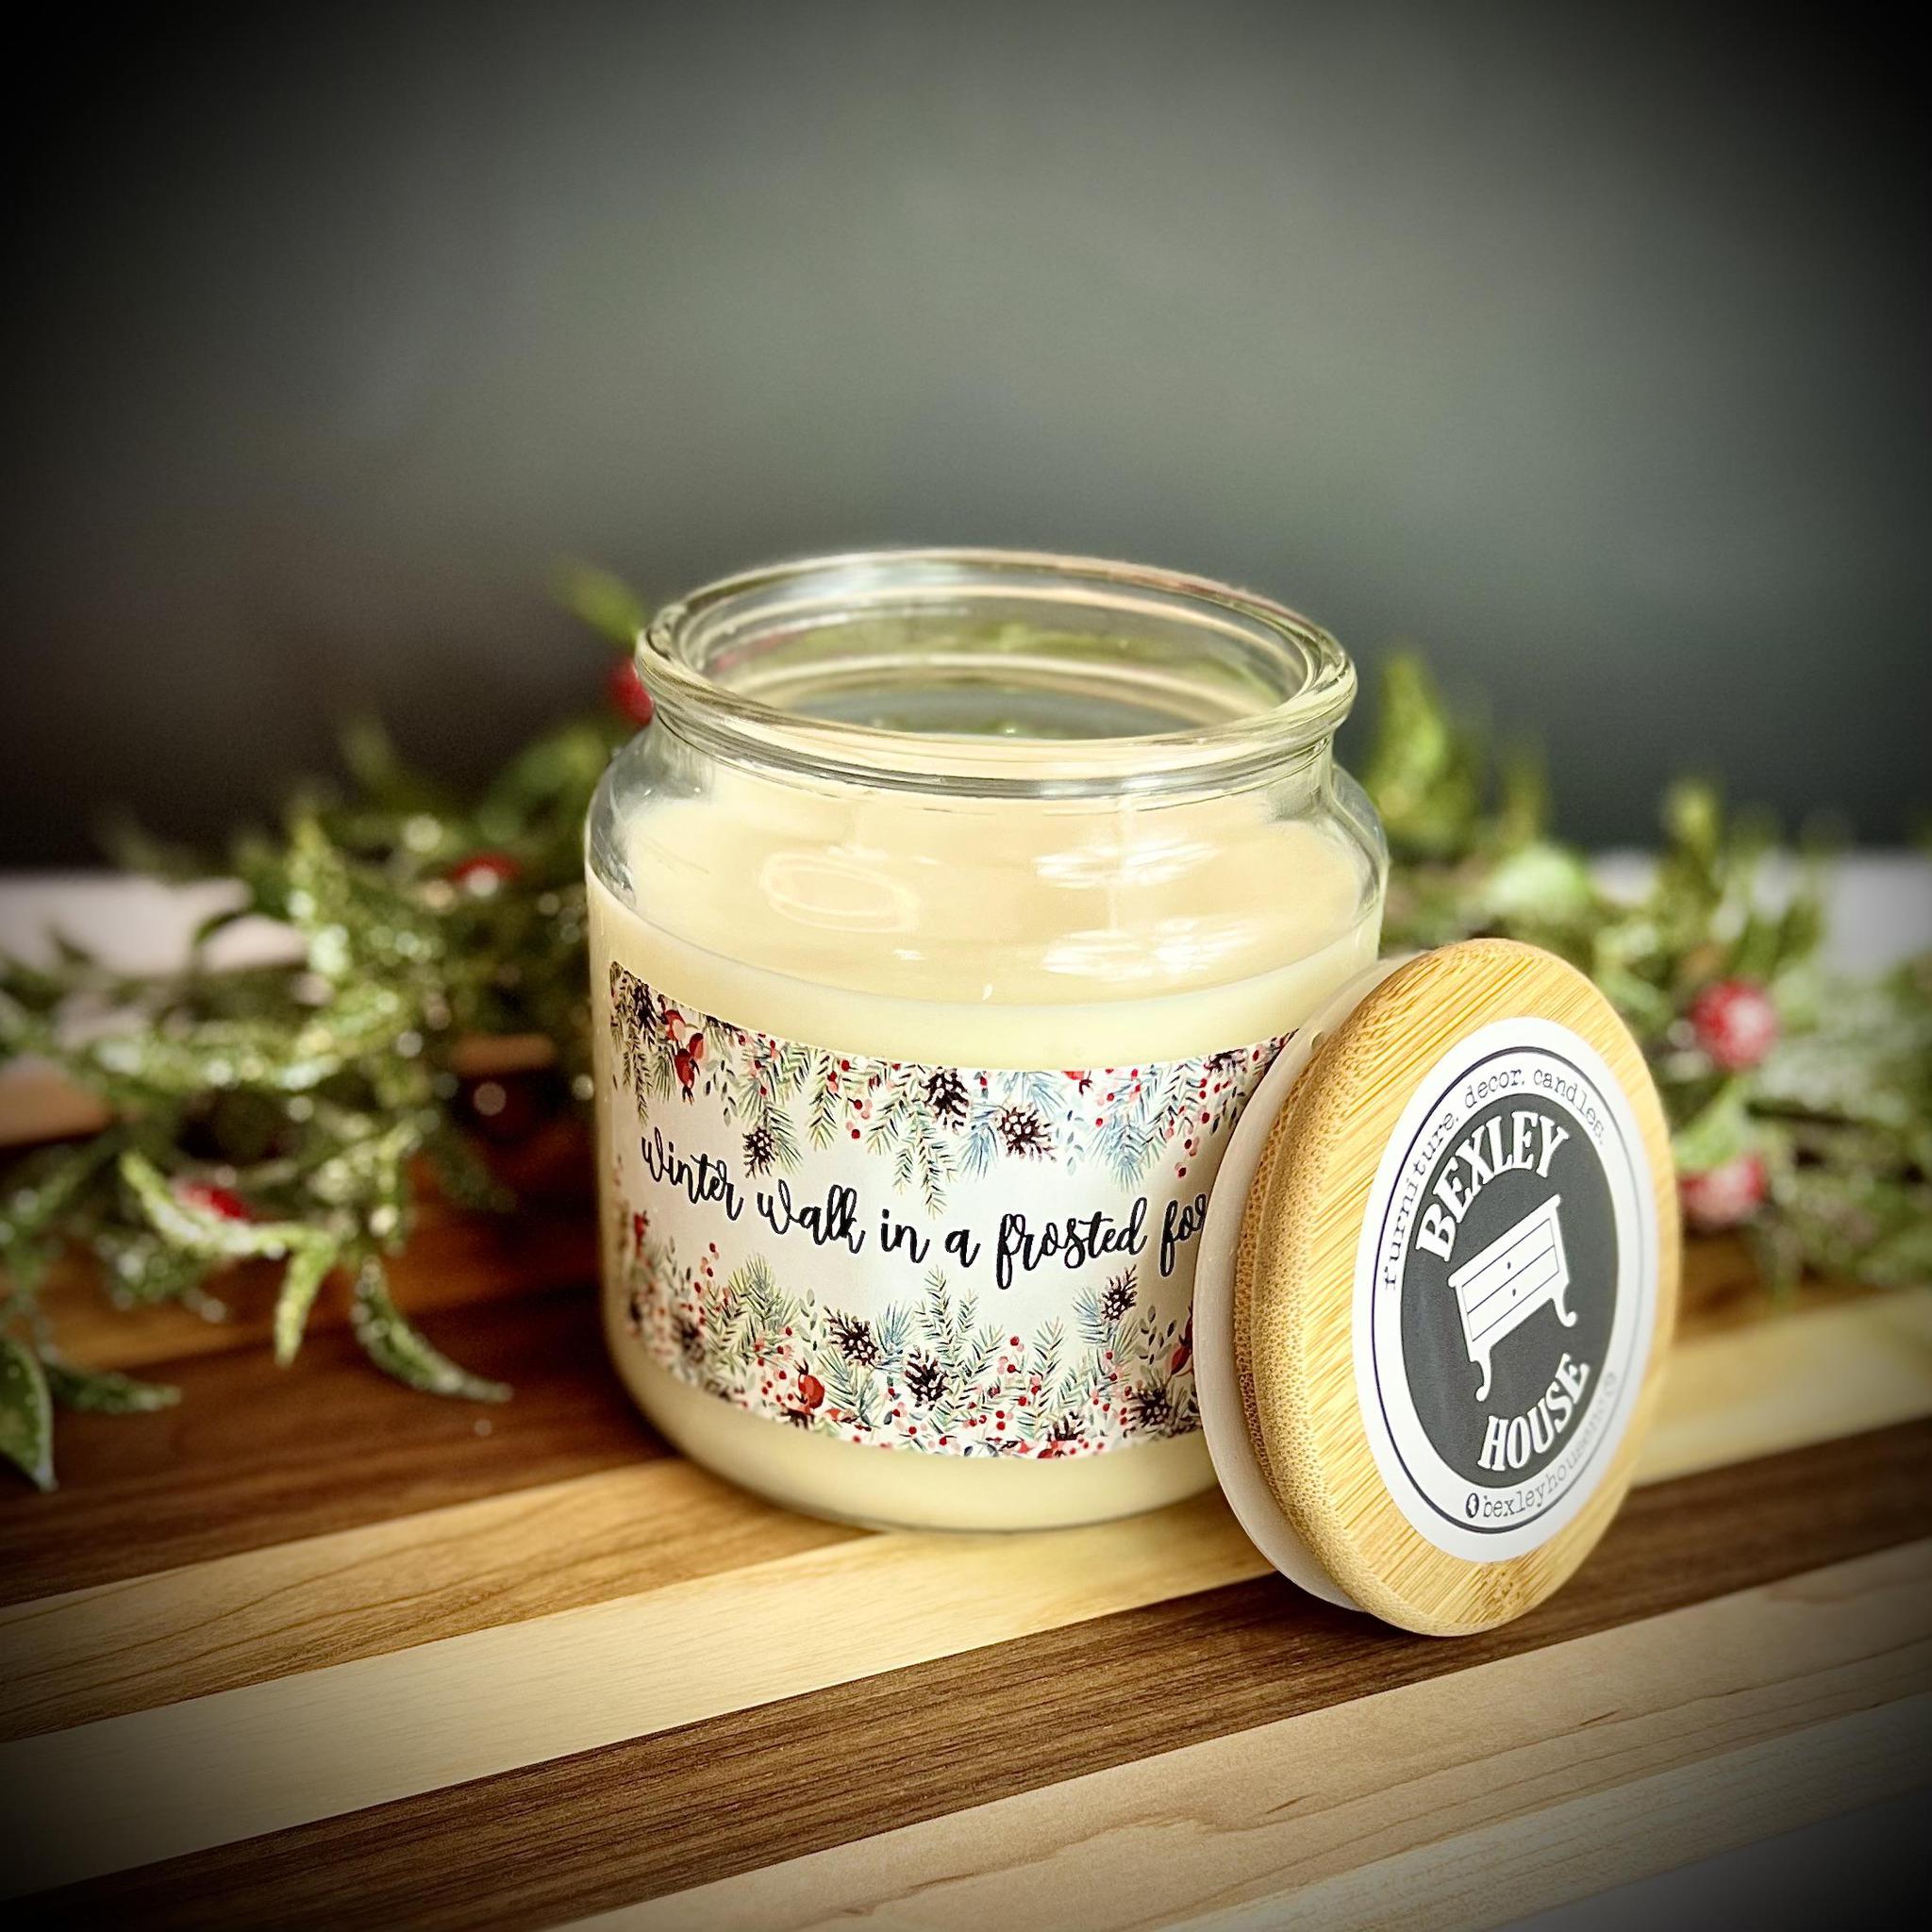 Bexley House 16oz Apothecary Candle - Winter Walk in a Frosted Forest